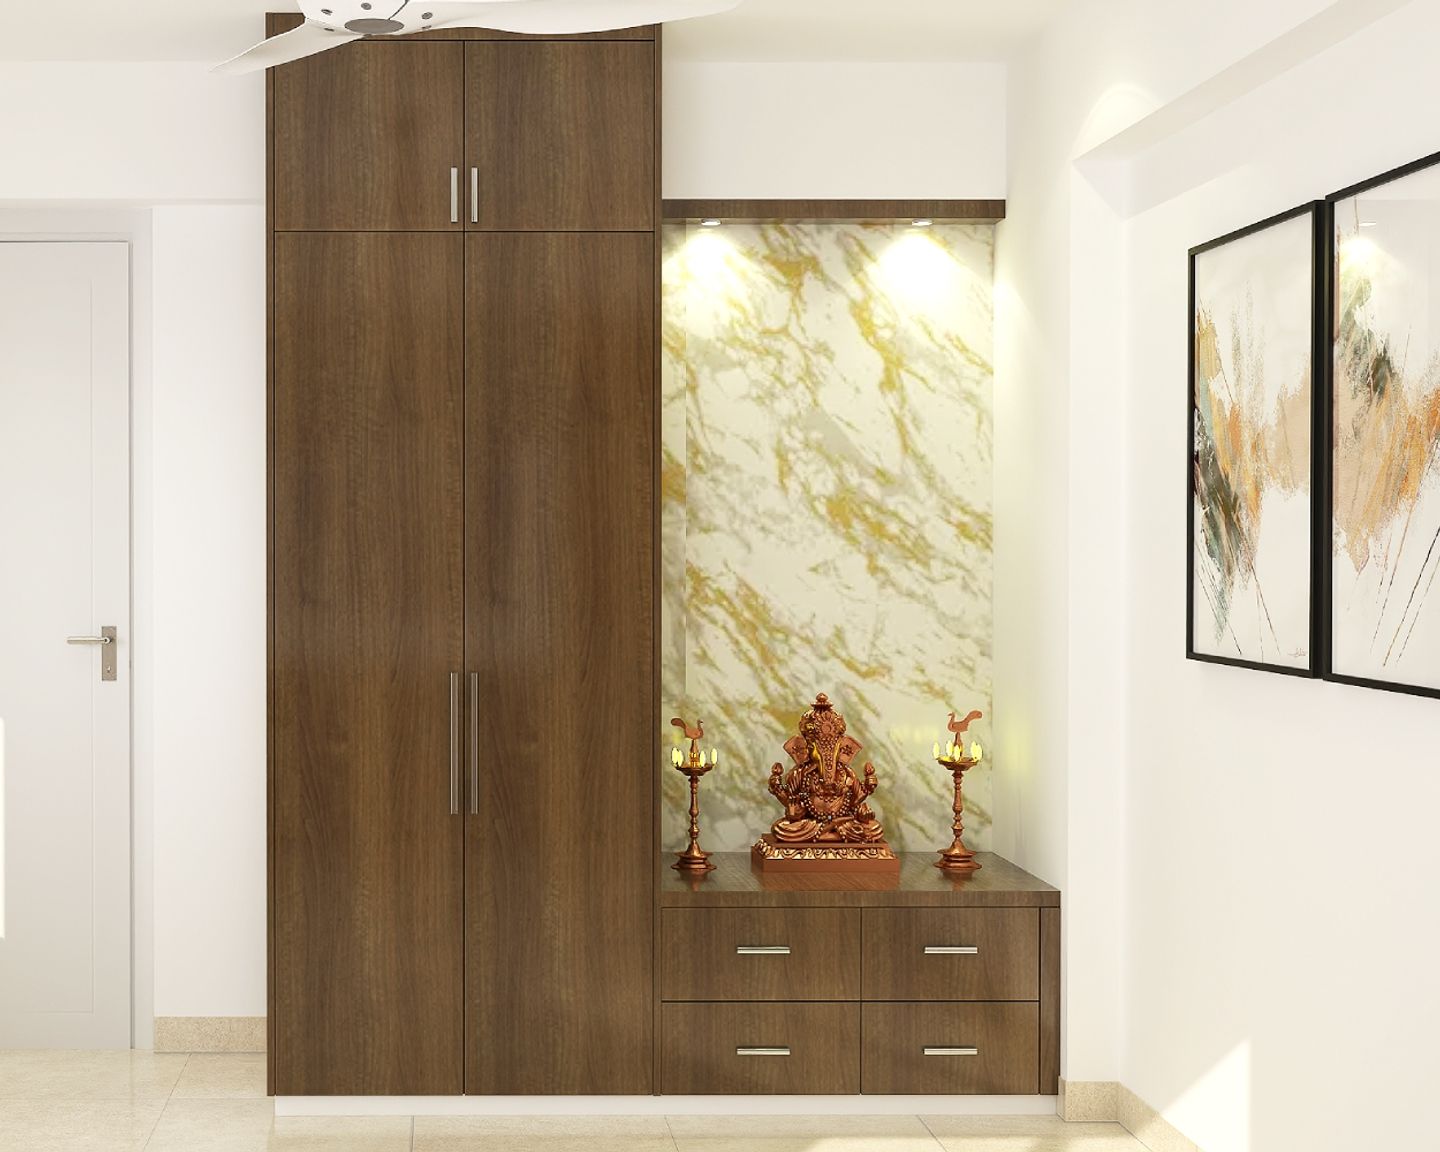 Wooden Mandir Design With Marble Wall Tile - Livspace